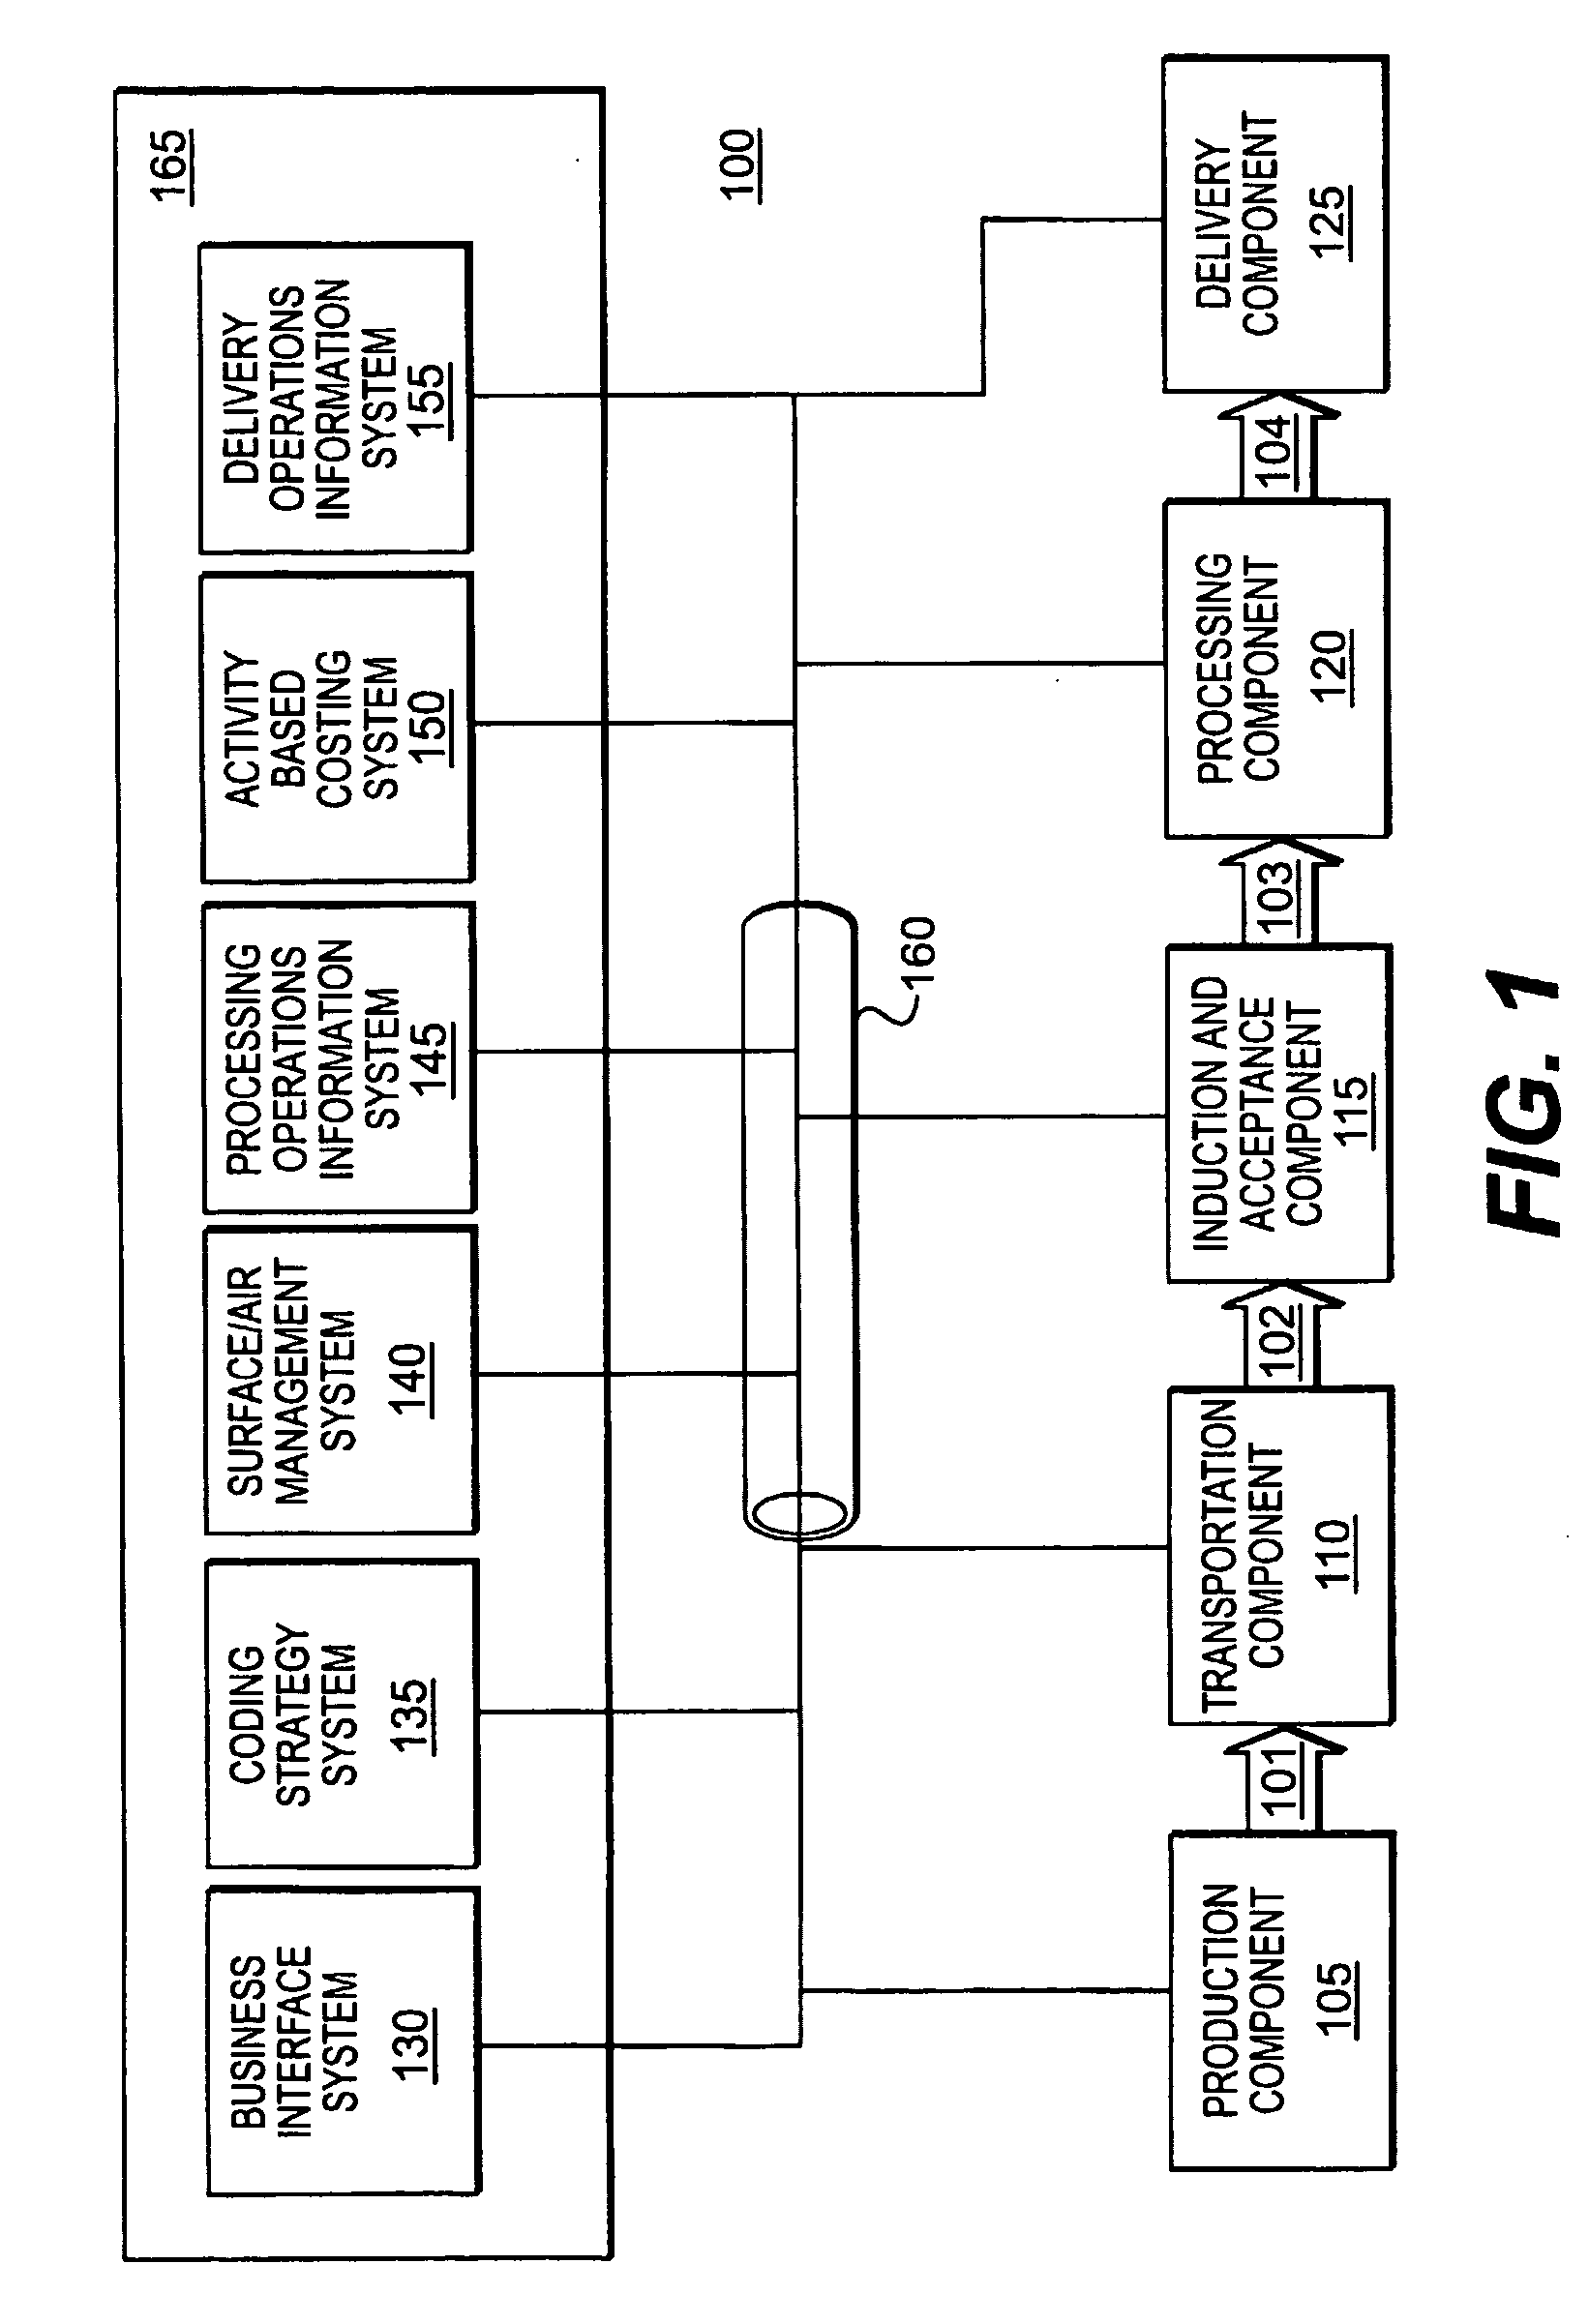 Systems and methods for processing items in an item delivery system